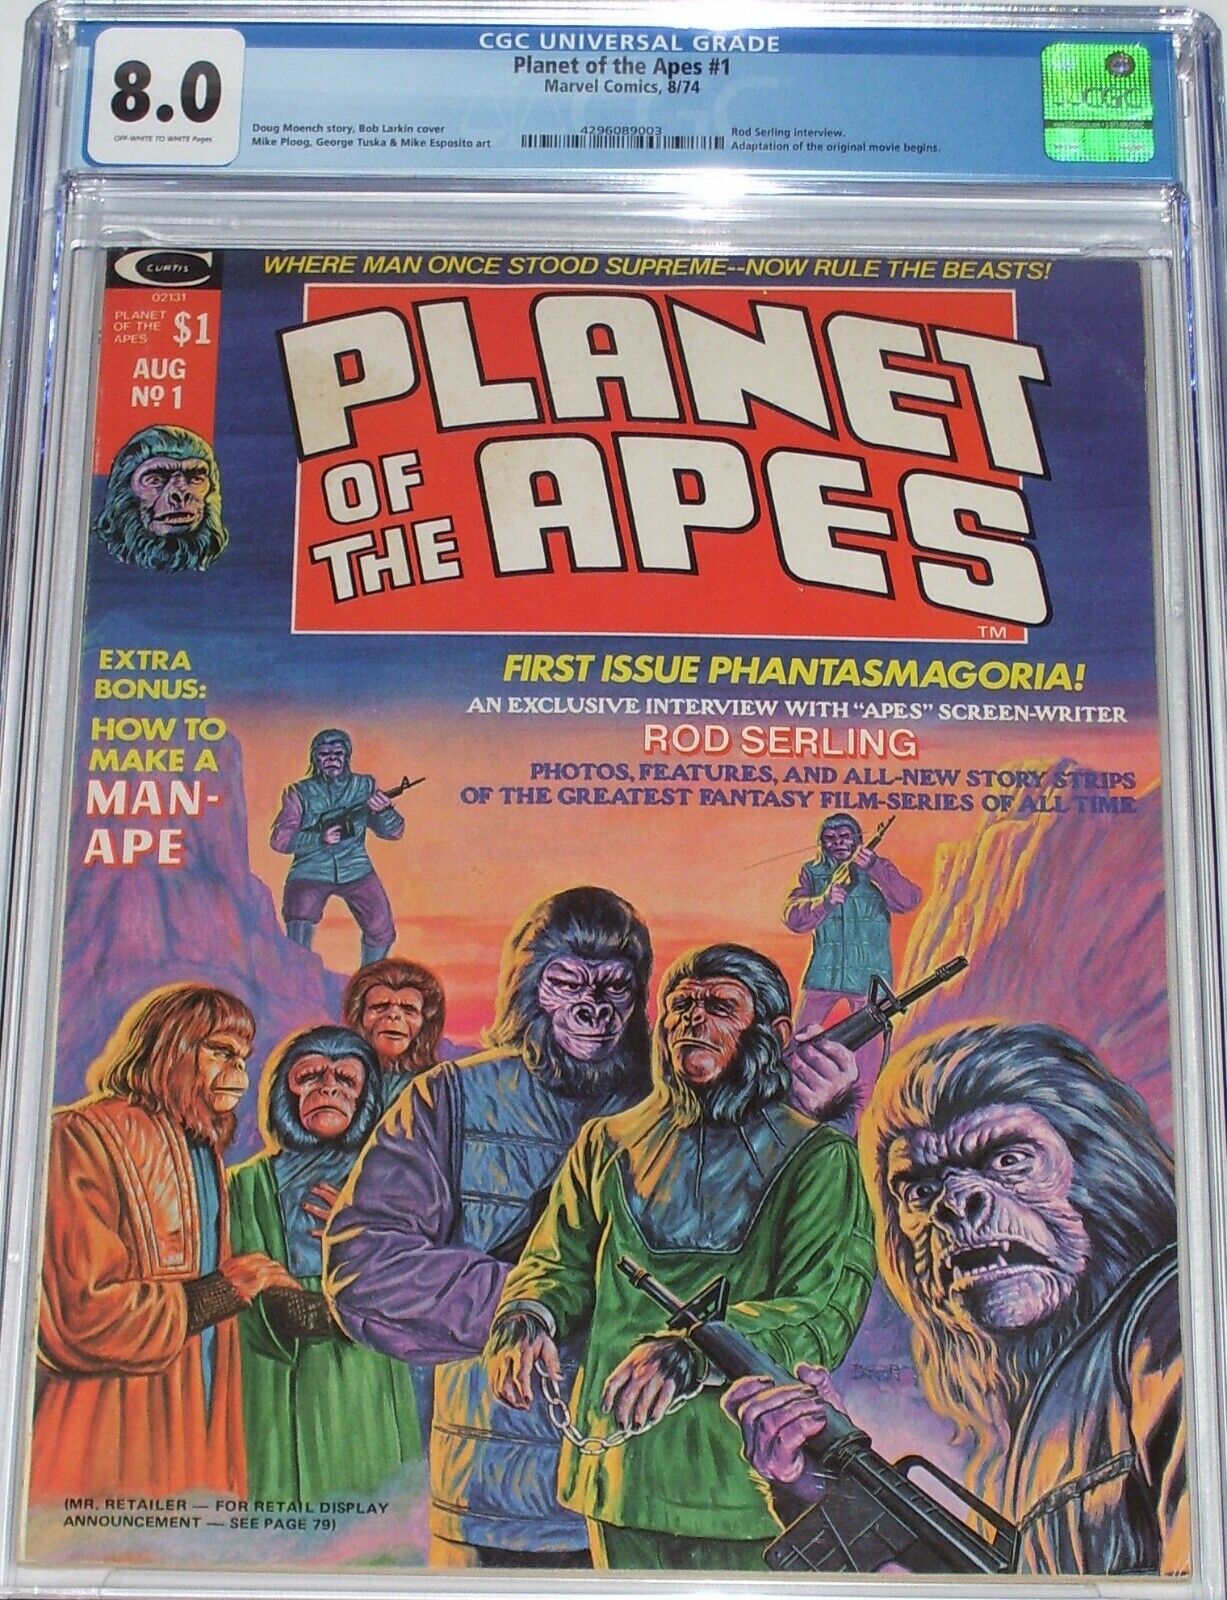 Planet of the Apes #1 CGC 5.0 from Aug 1974 Movie adaptation